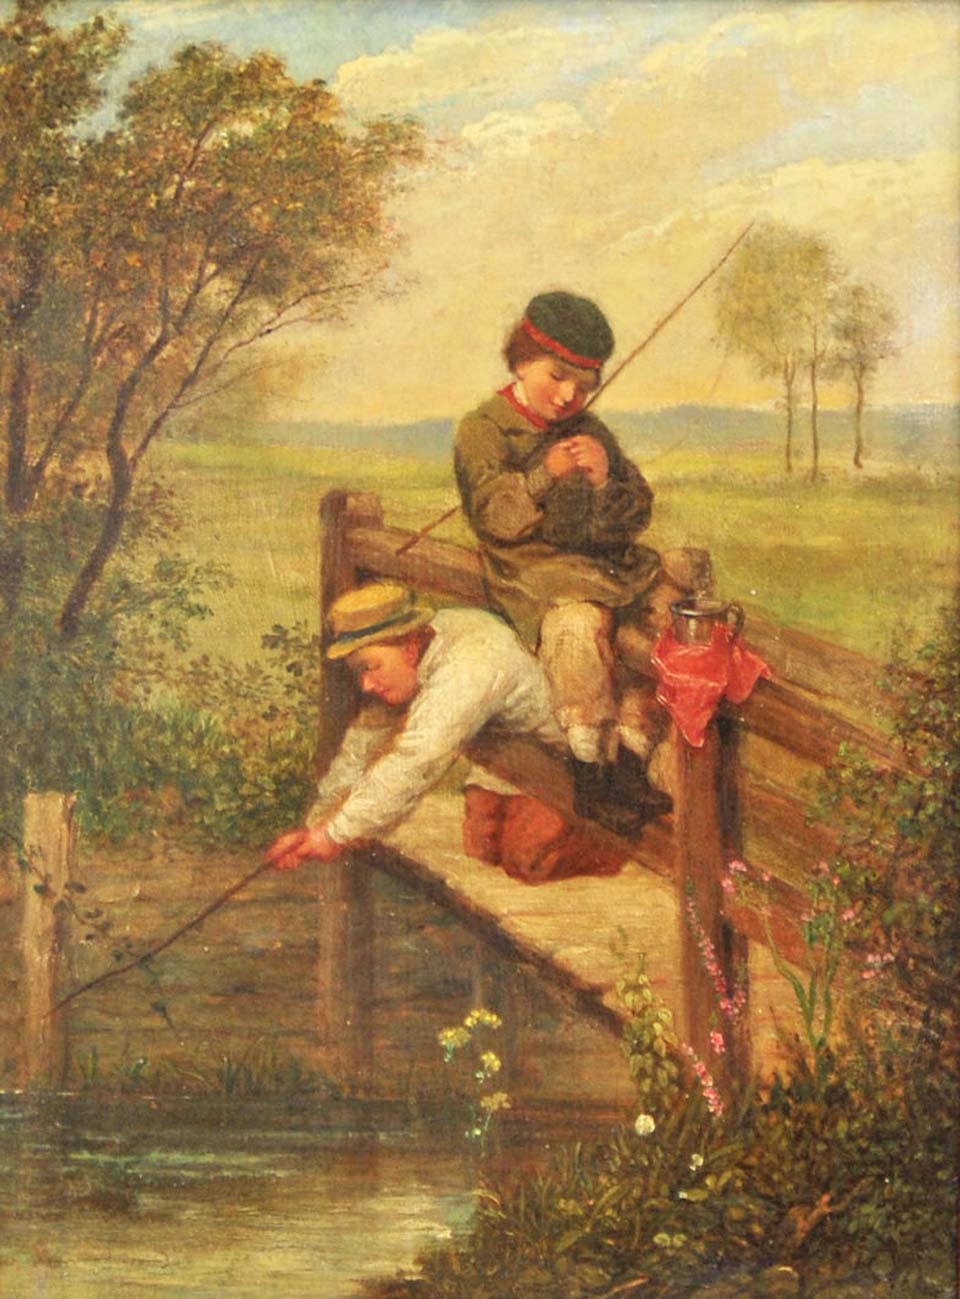 The two young anglers